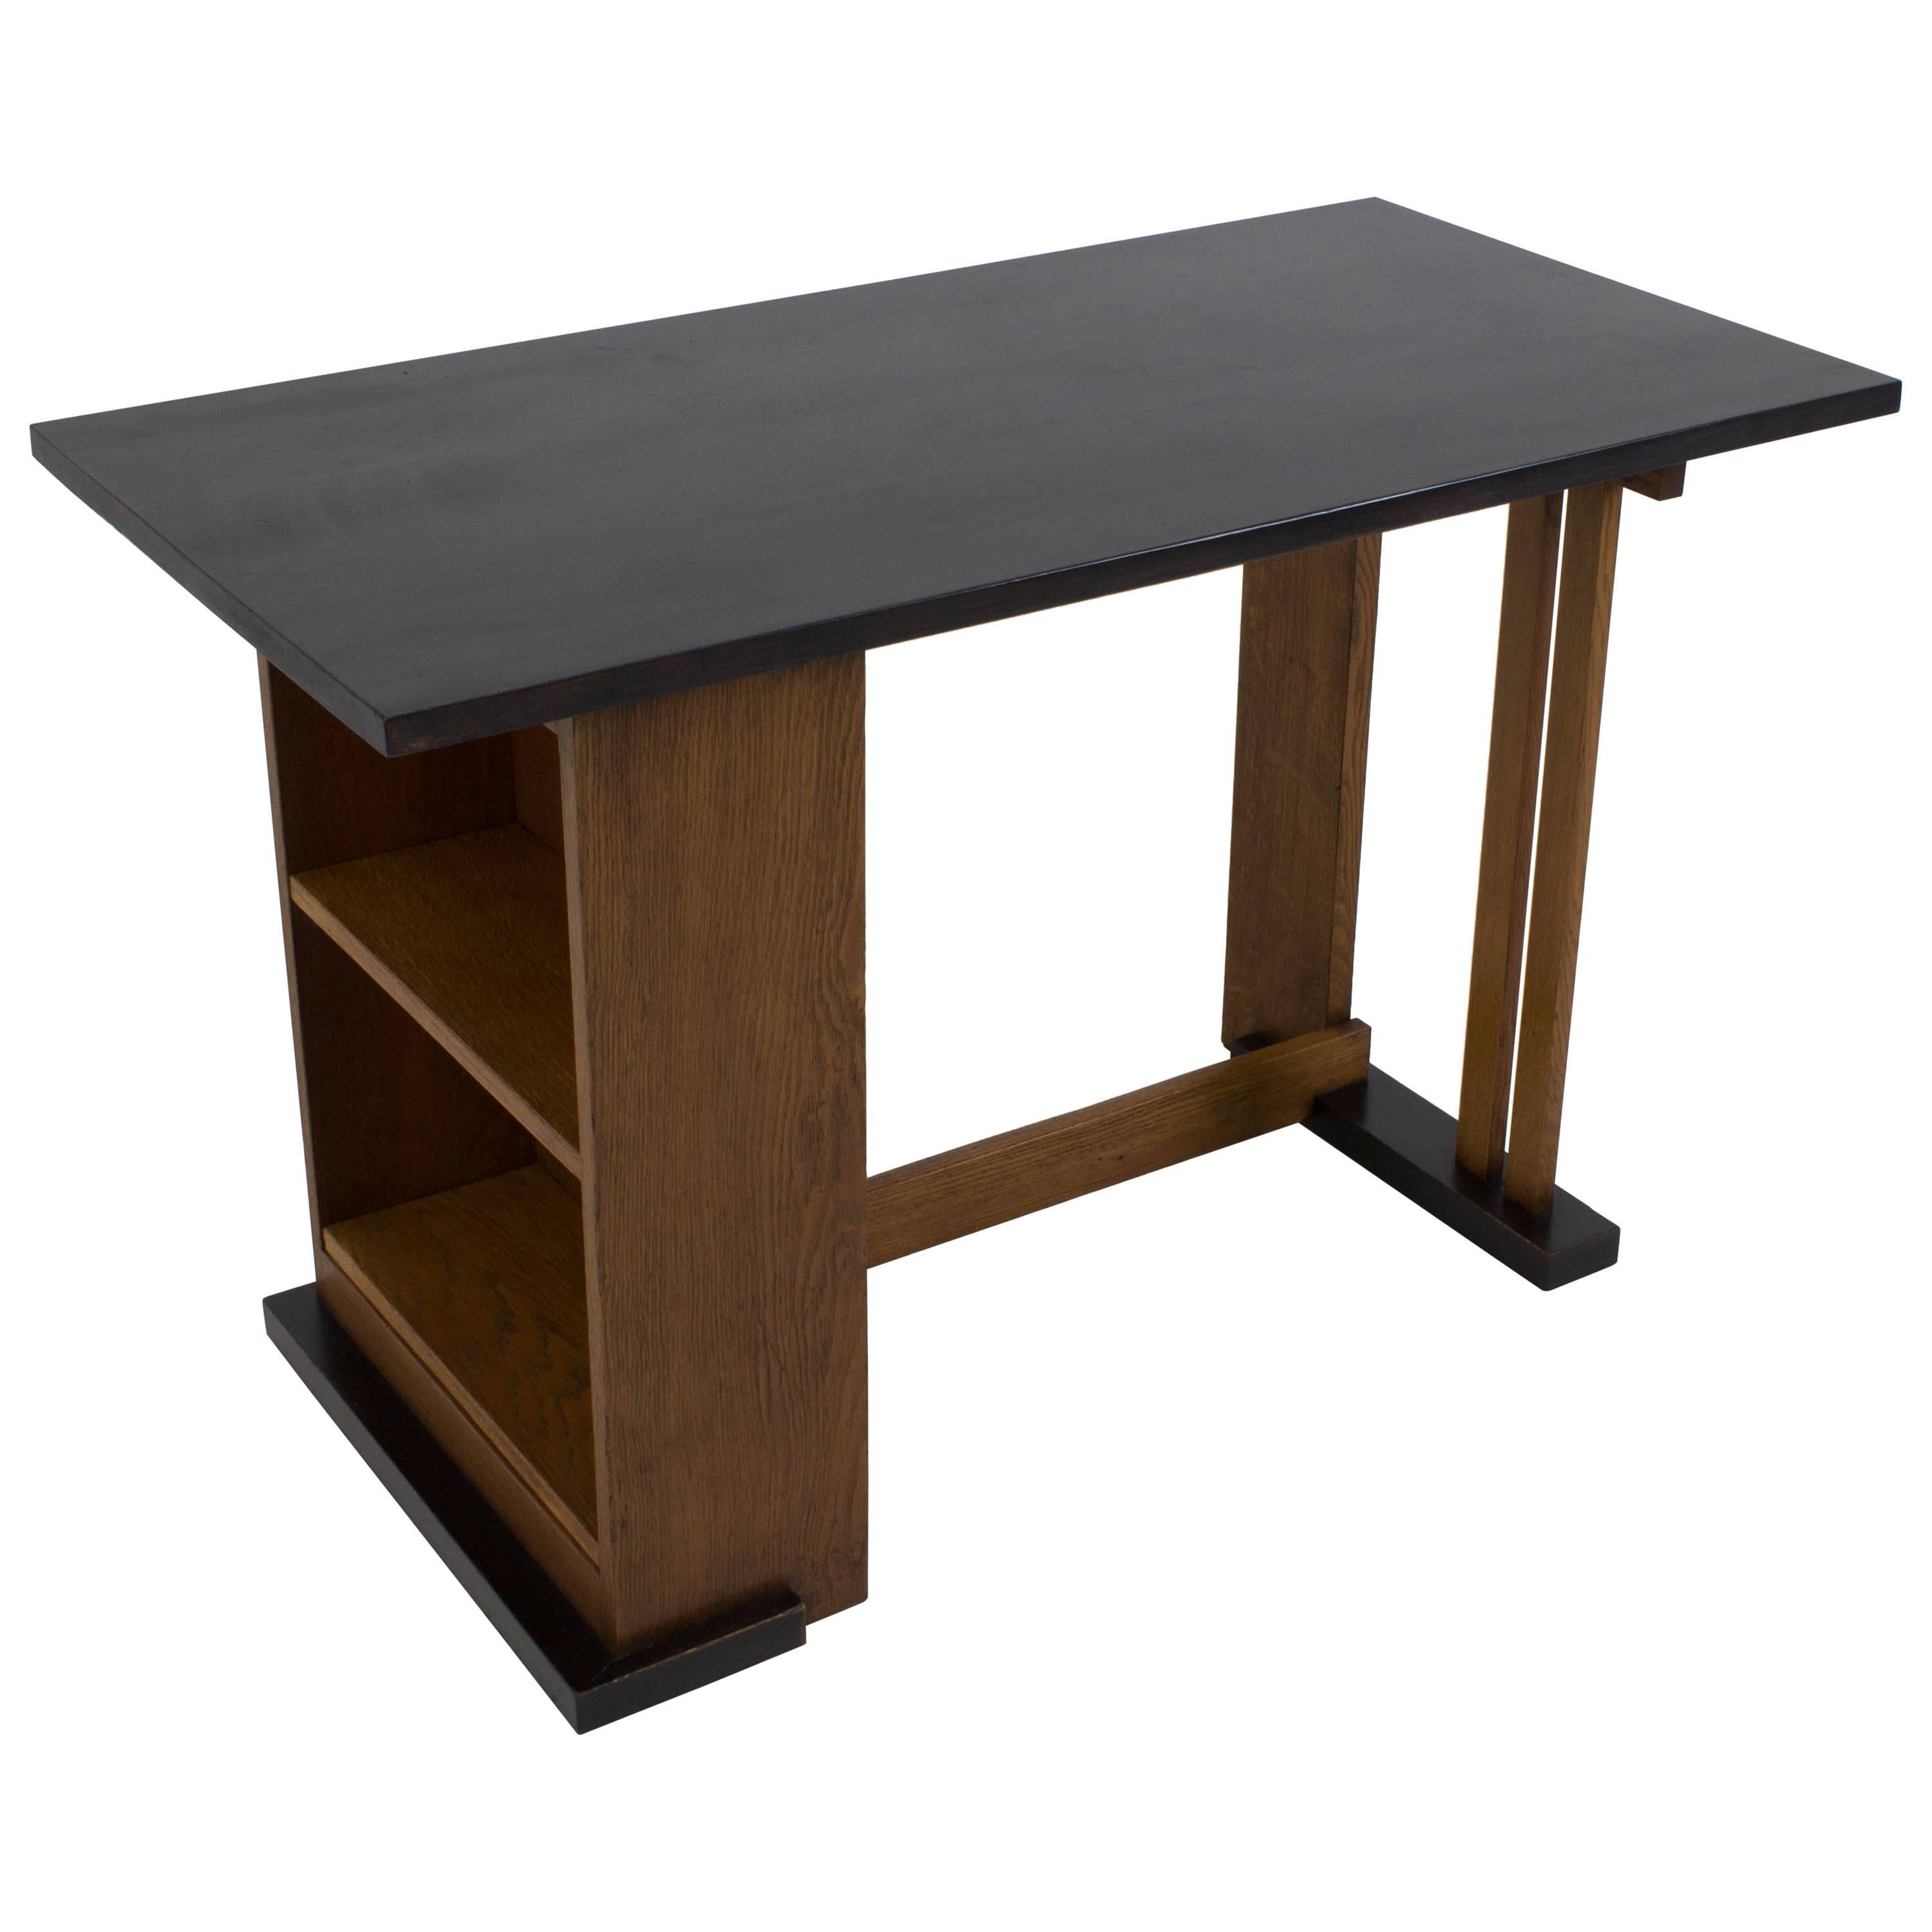 Important and Rare Art Deco Haagse School Desk by Cor Alons for L.O.V.